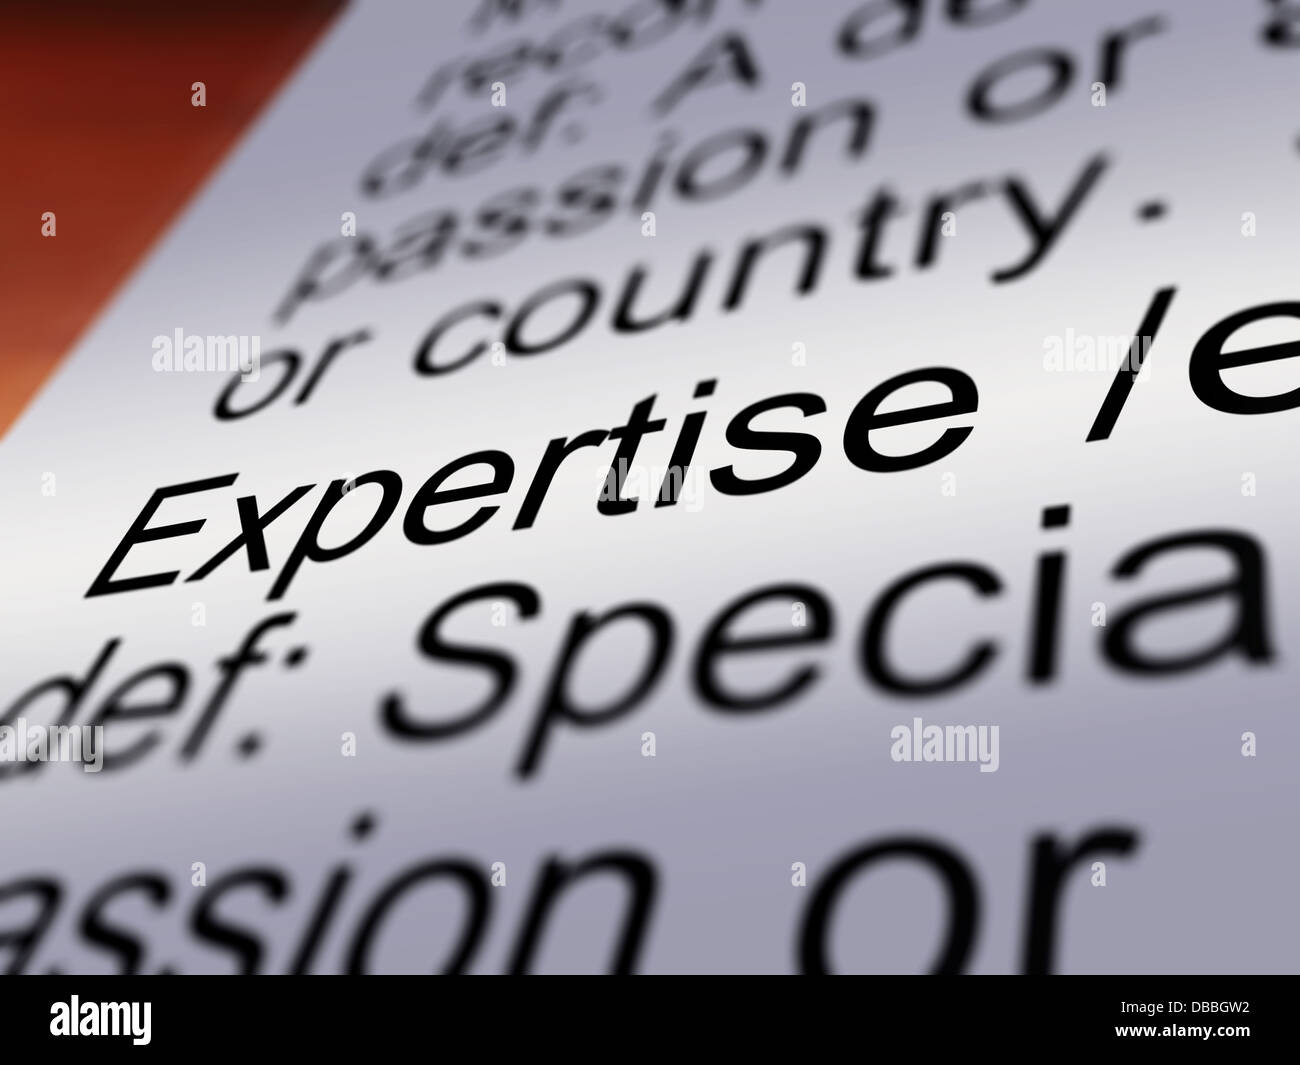 Expertise Definition Closeup Showing Skills Or Proficiency Stock Photo